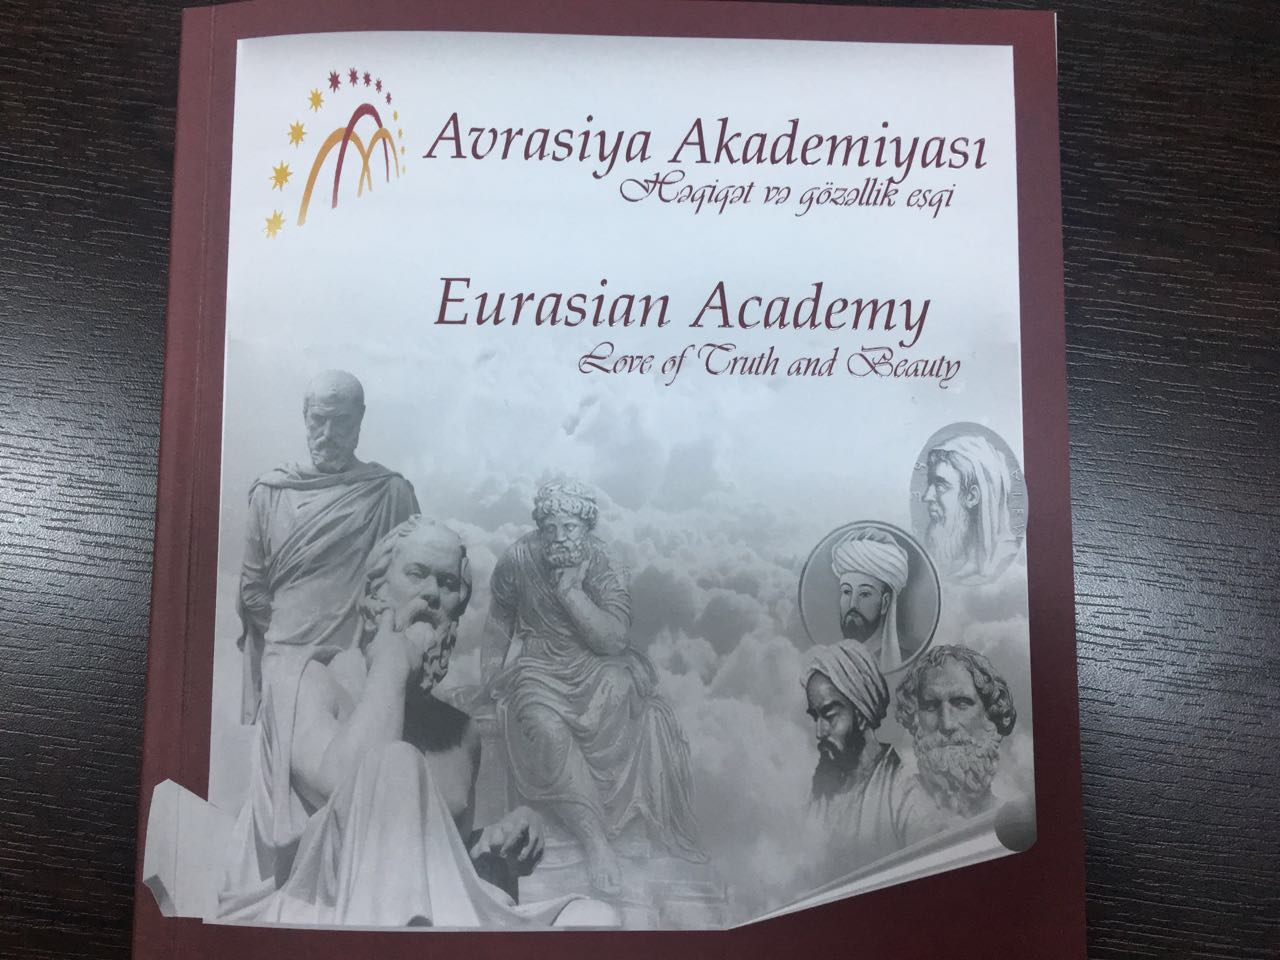  The Book-album of the Eurasian Academy was published 